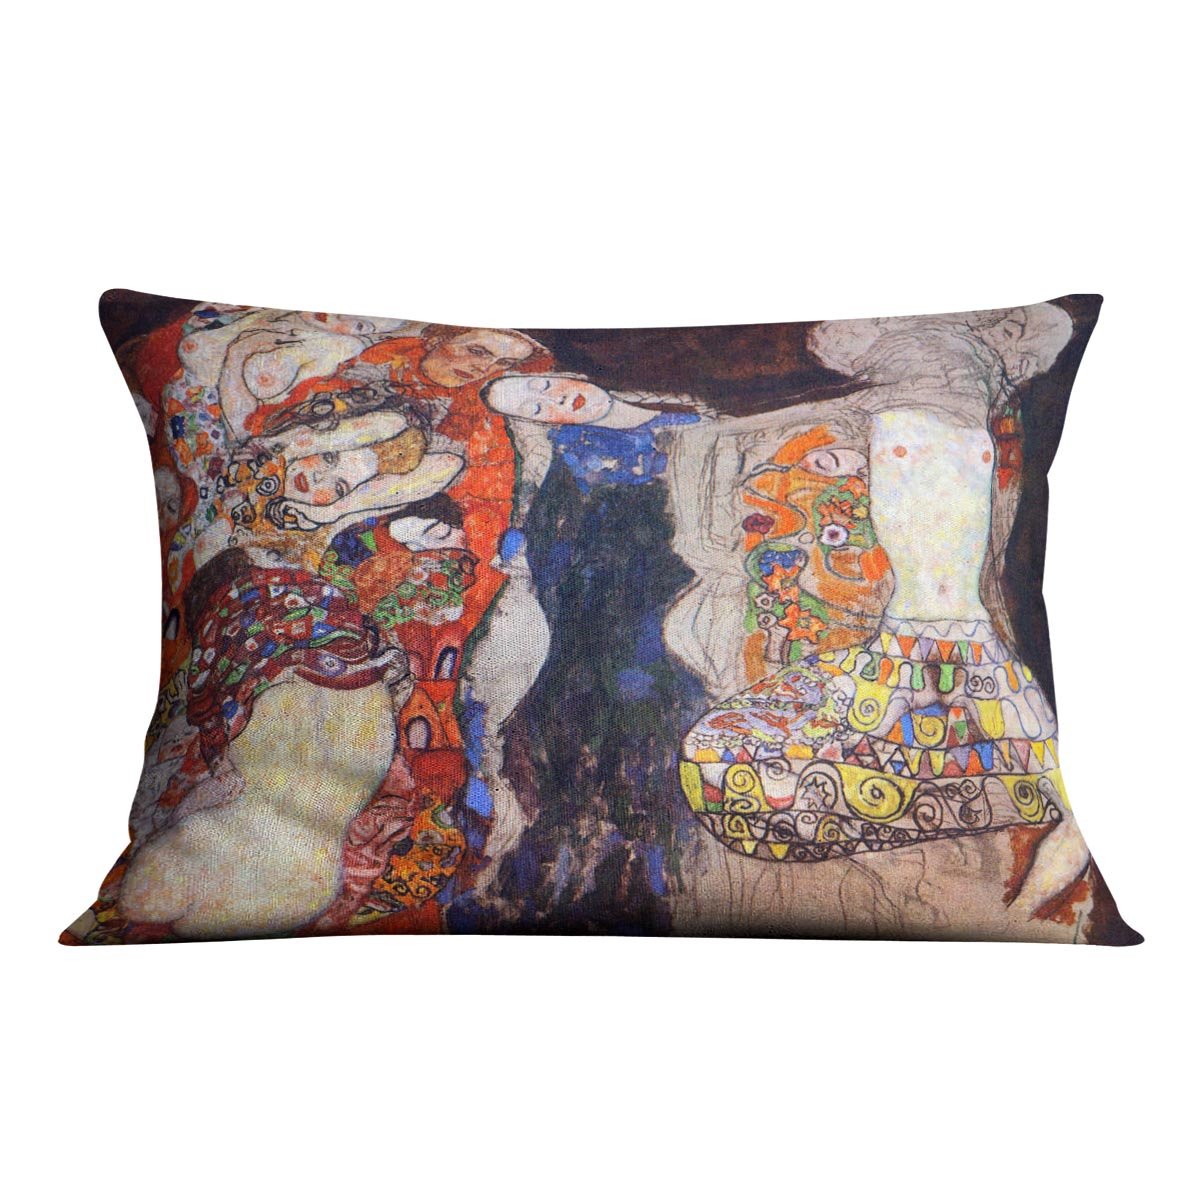 adorn the bride with veil and wreath by Klimt Throw Pillow